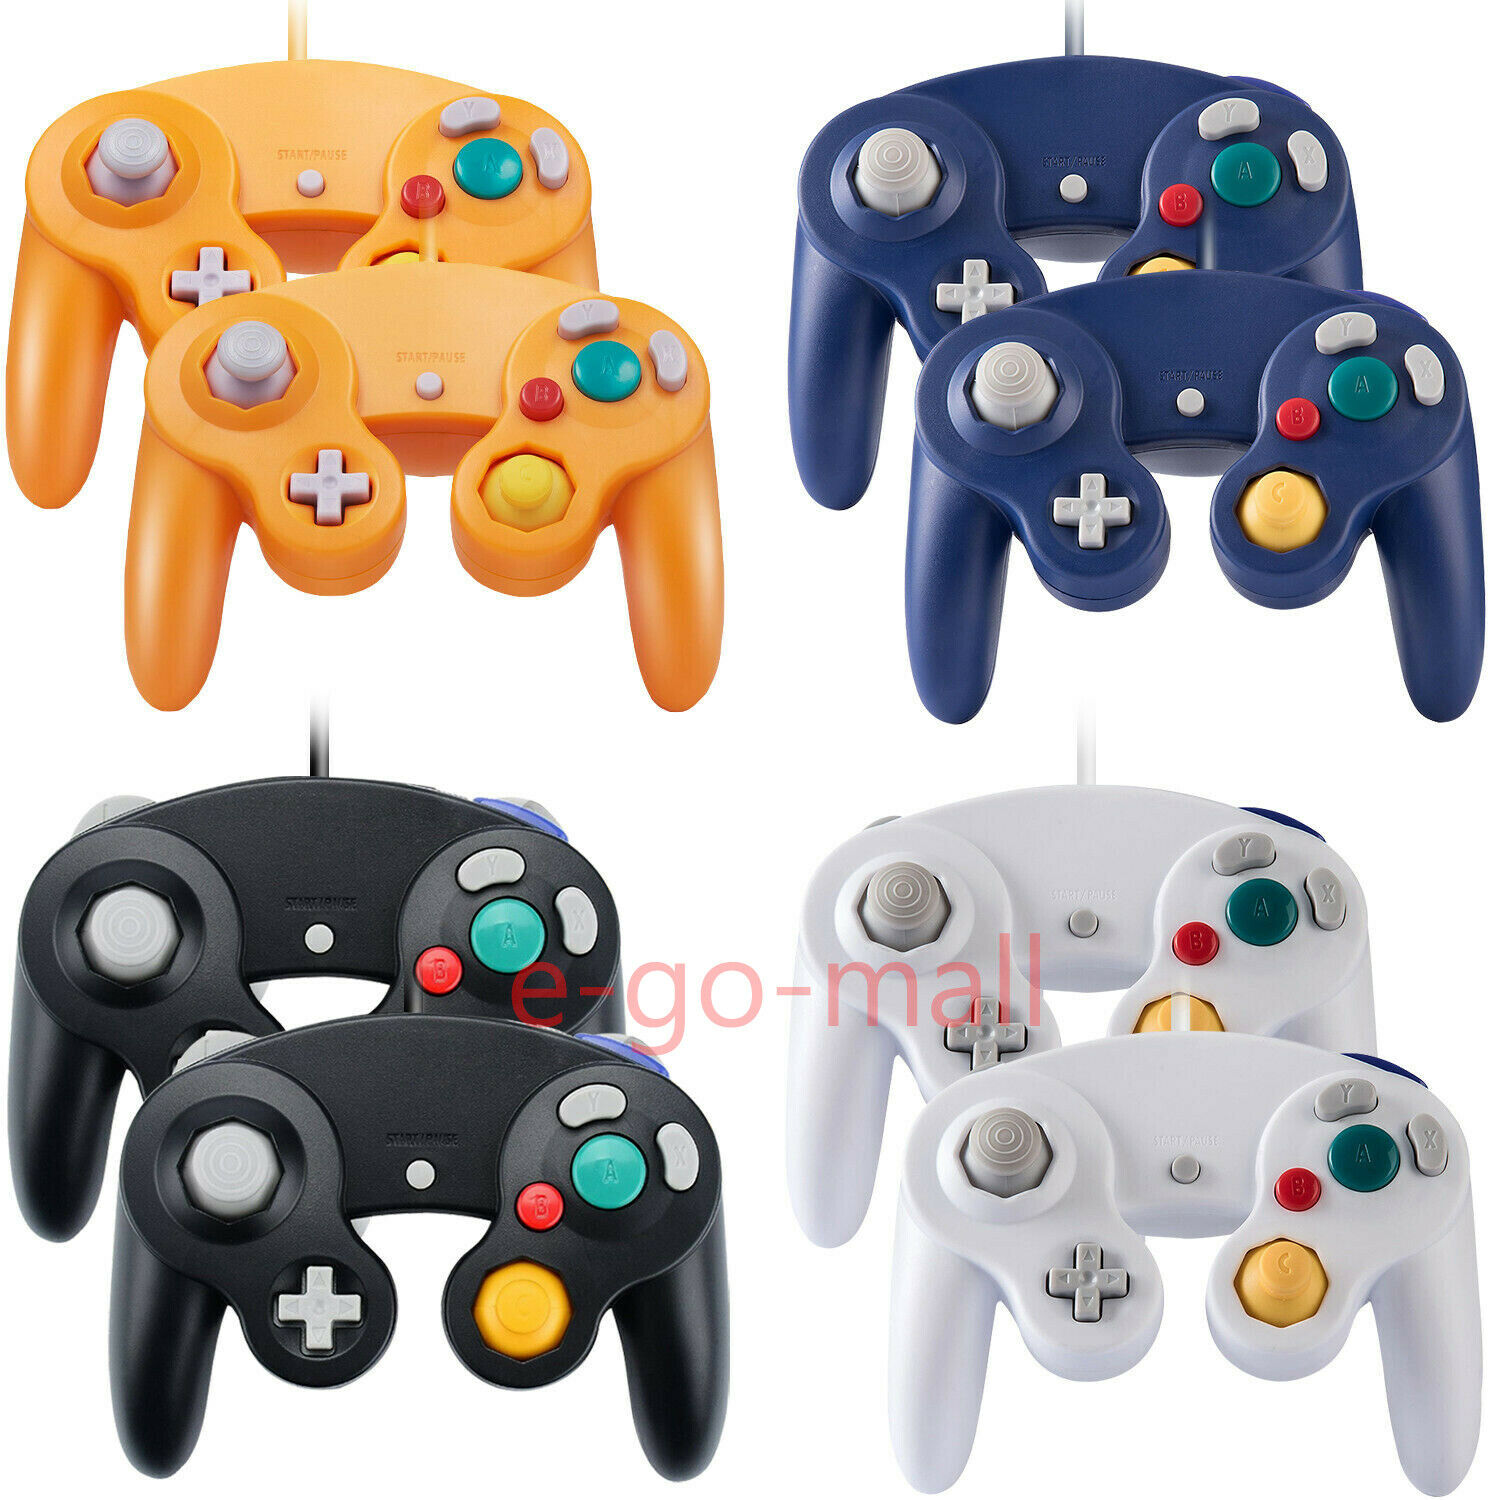 2pack Wired Ngc Controller Gamepad For Nintendo Gamecube & Wii U Console Switch